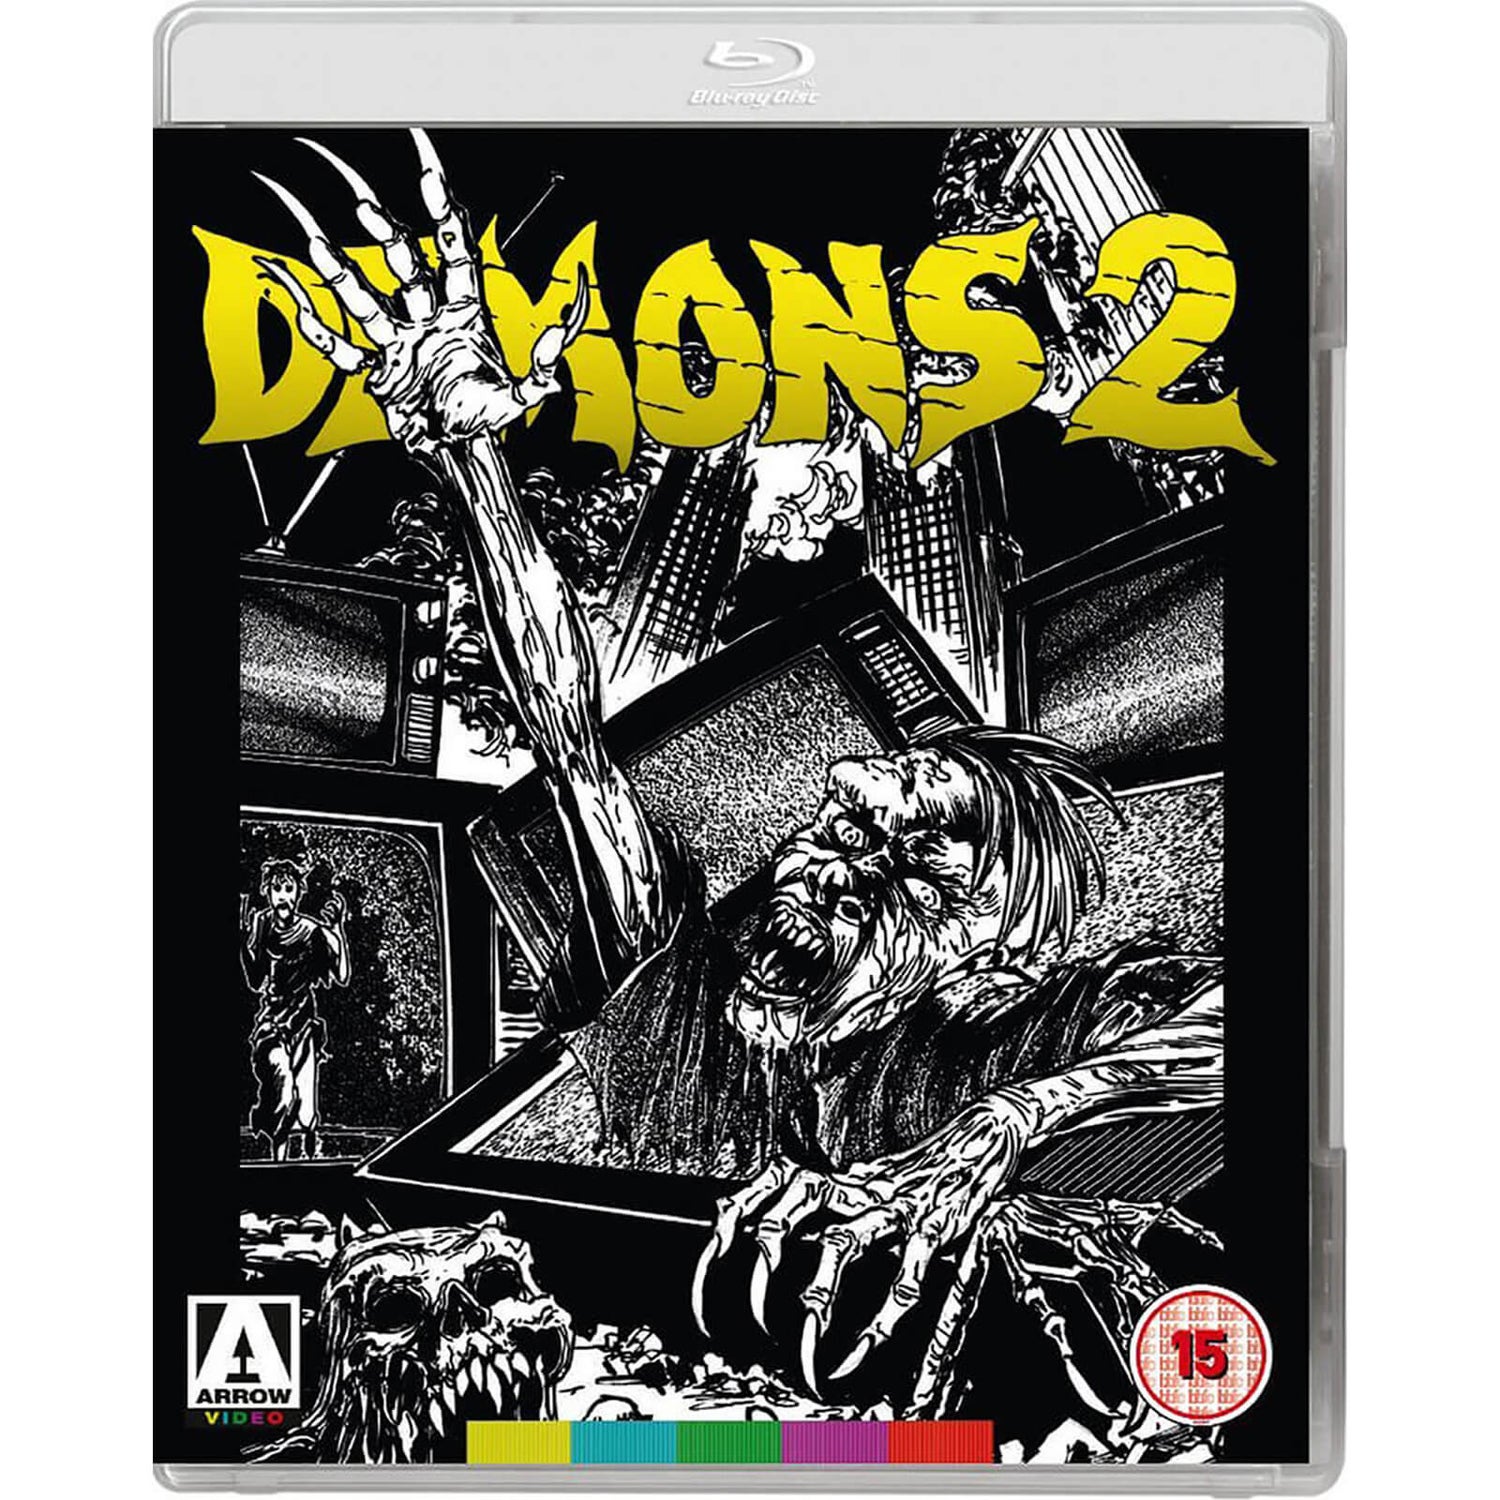 Demons 2 - Includes DVD